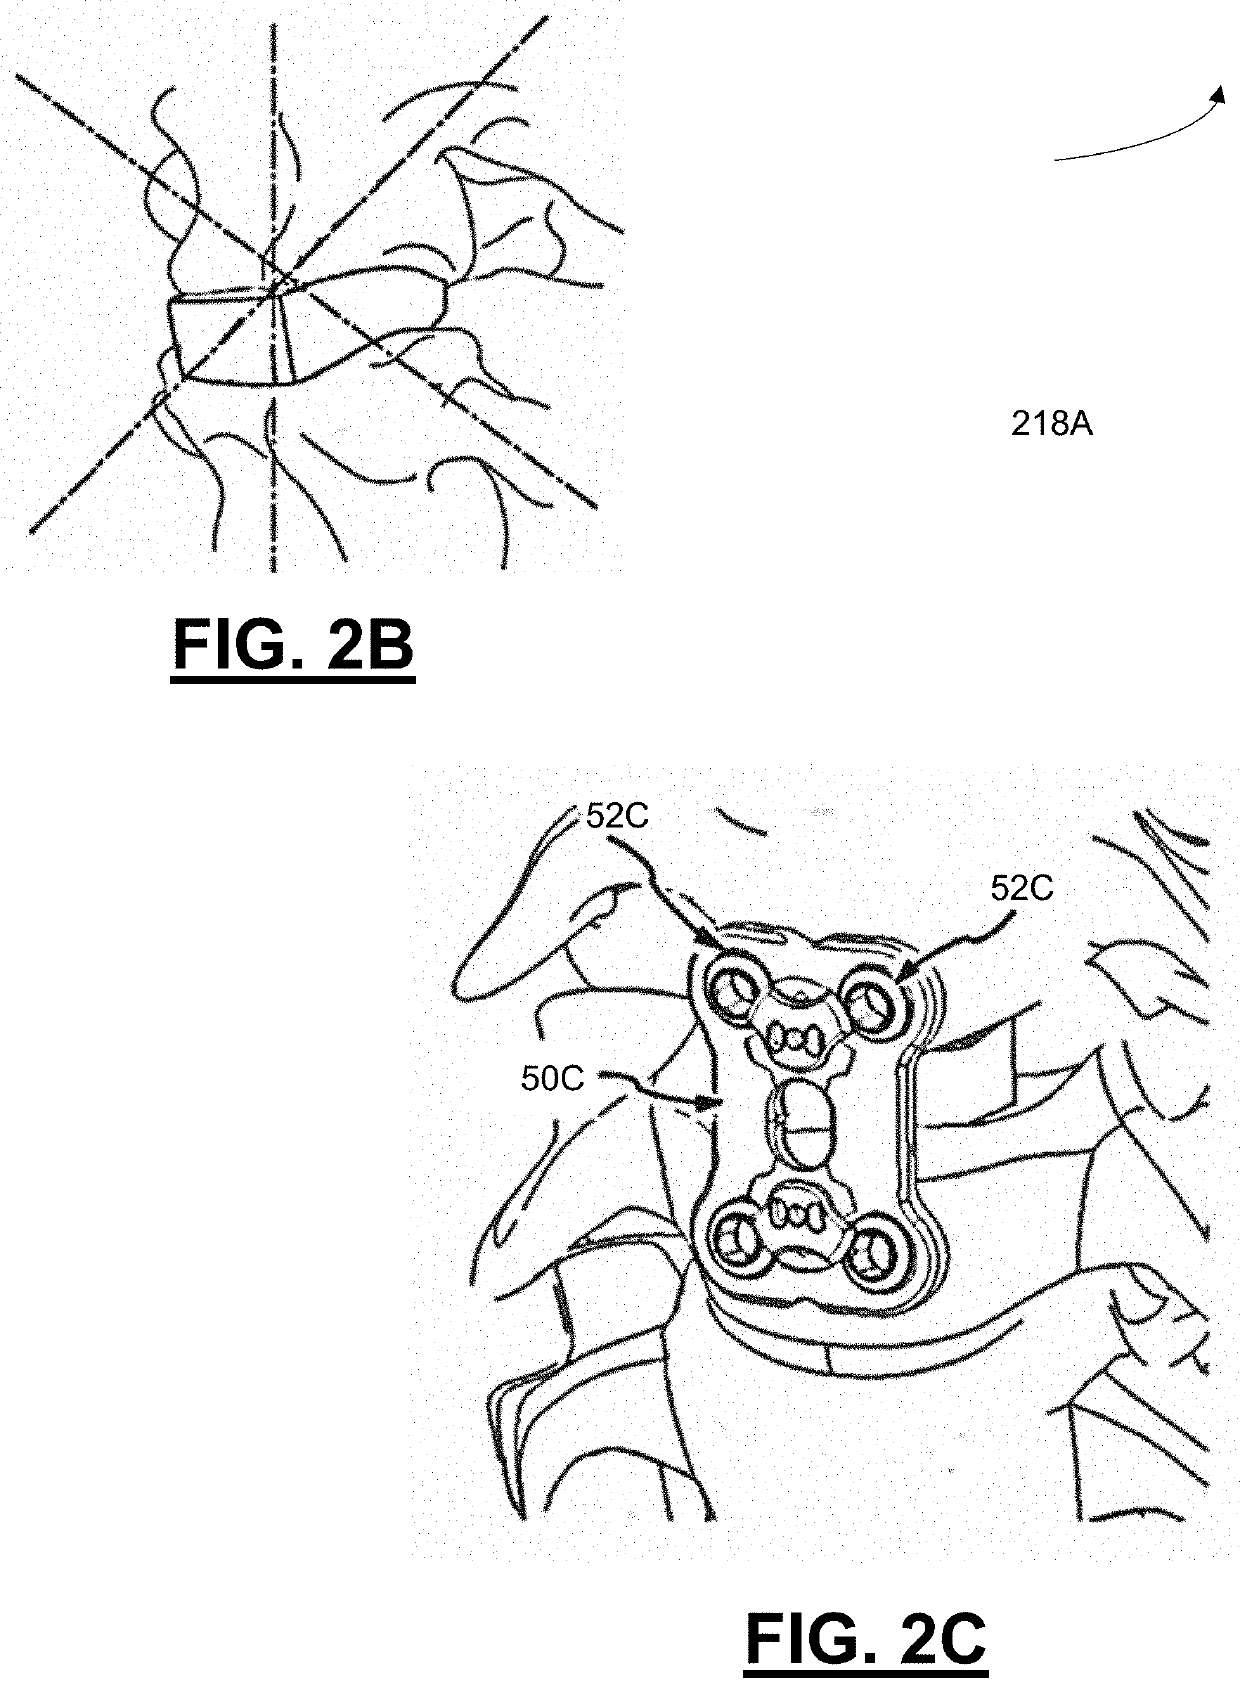 Hybrid spinal cages, systems and methods